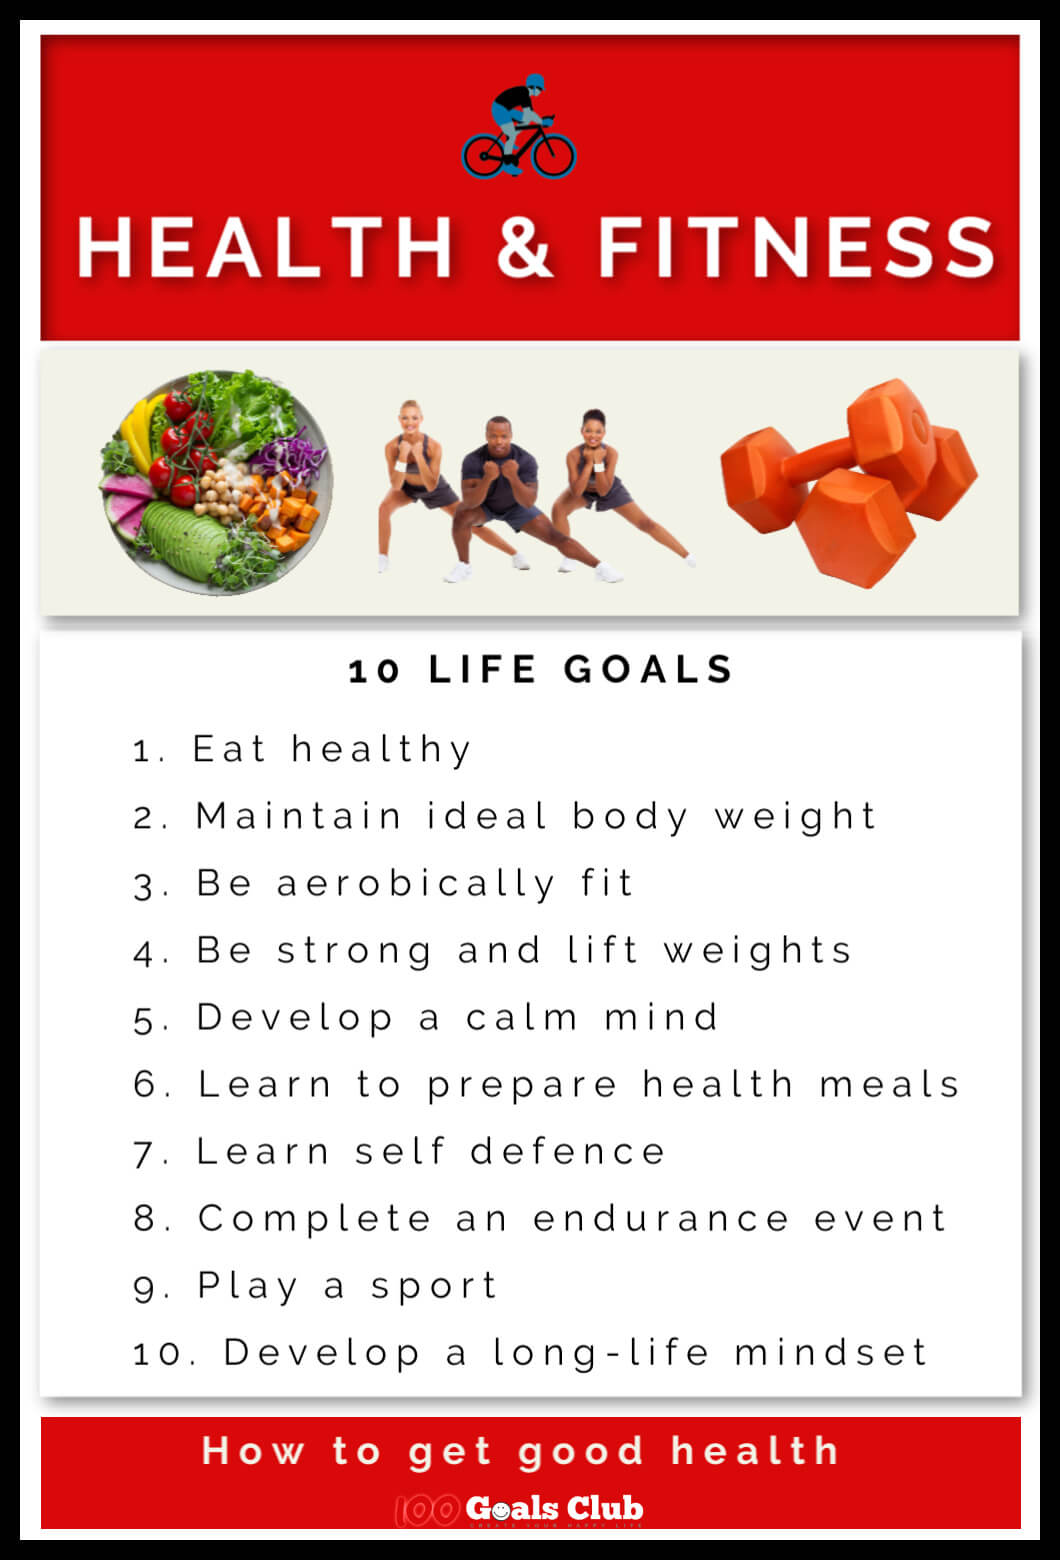 How to get good health